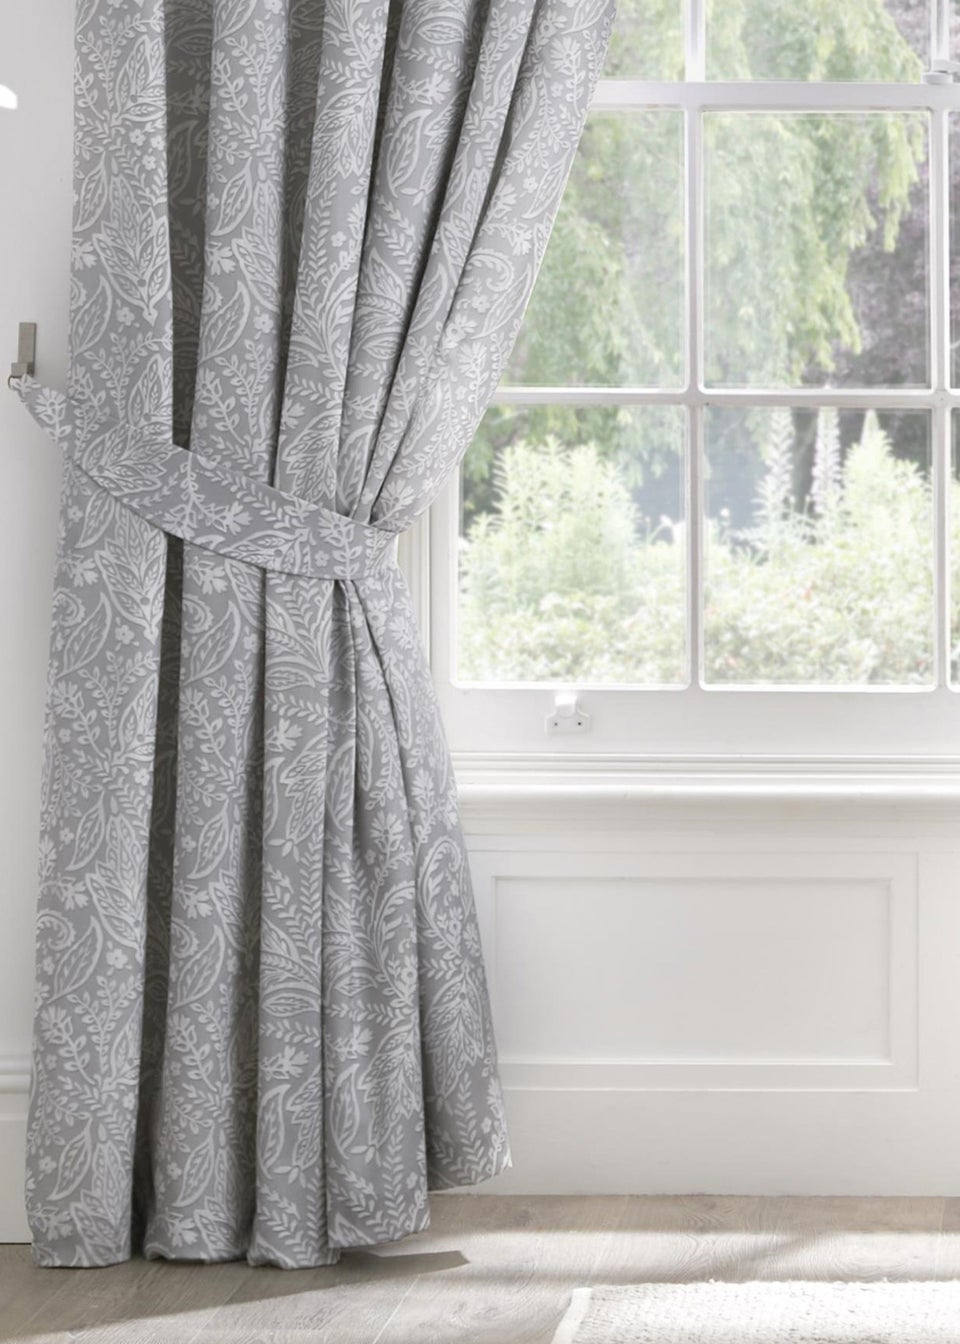 Dreams & Drapes Aveline Grey Pencil Pleat Curtains With Tie-Backs